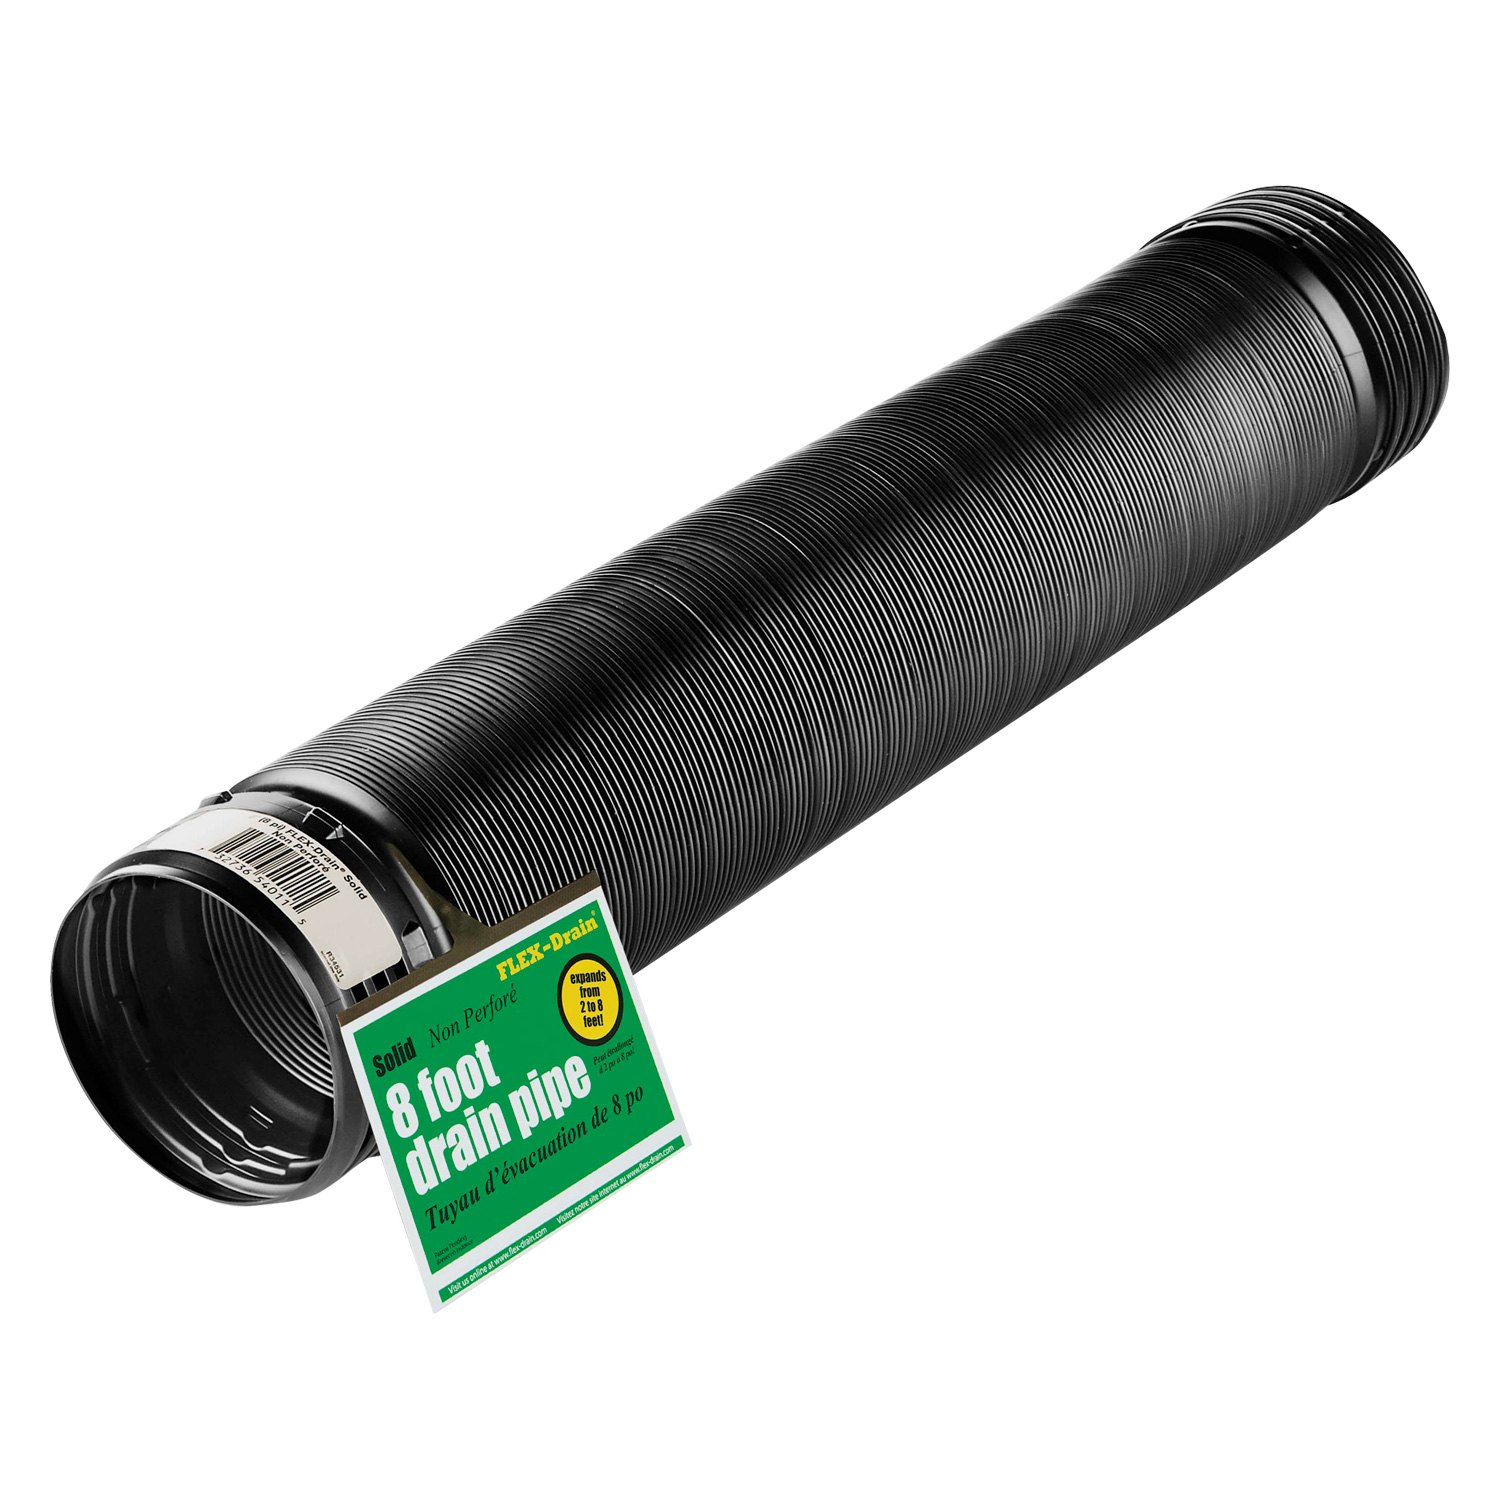 FLEX-Drain ® - Flexible and Expandable Landscaping Drain Tubing Solid Pipe.